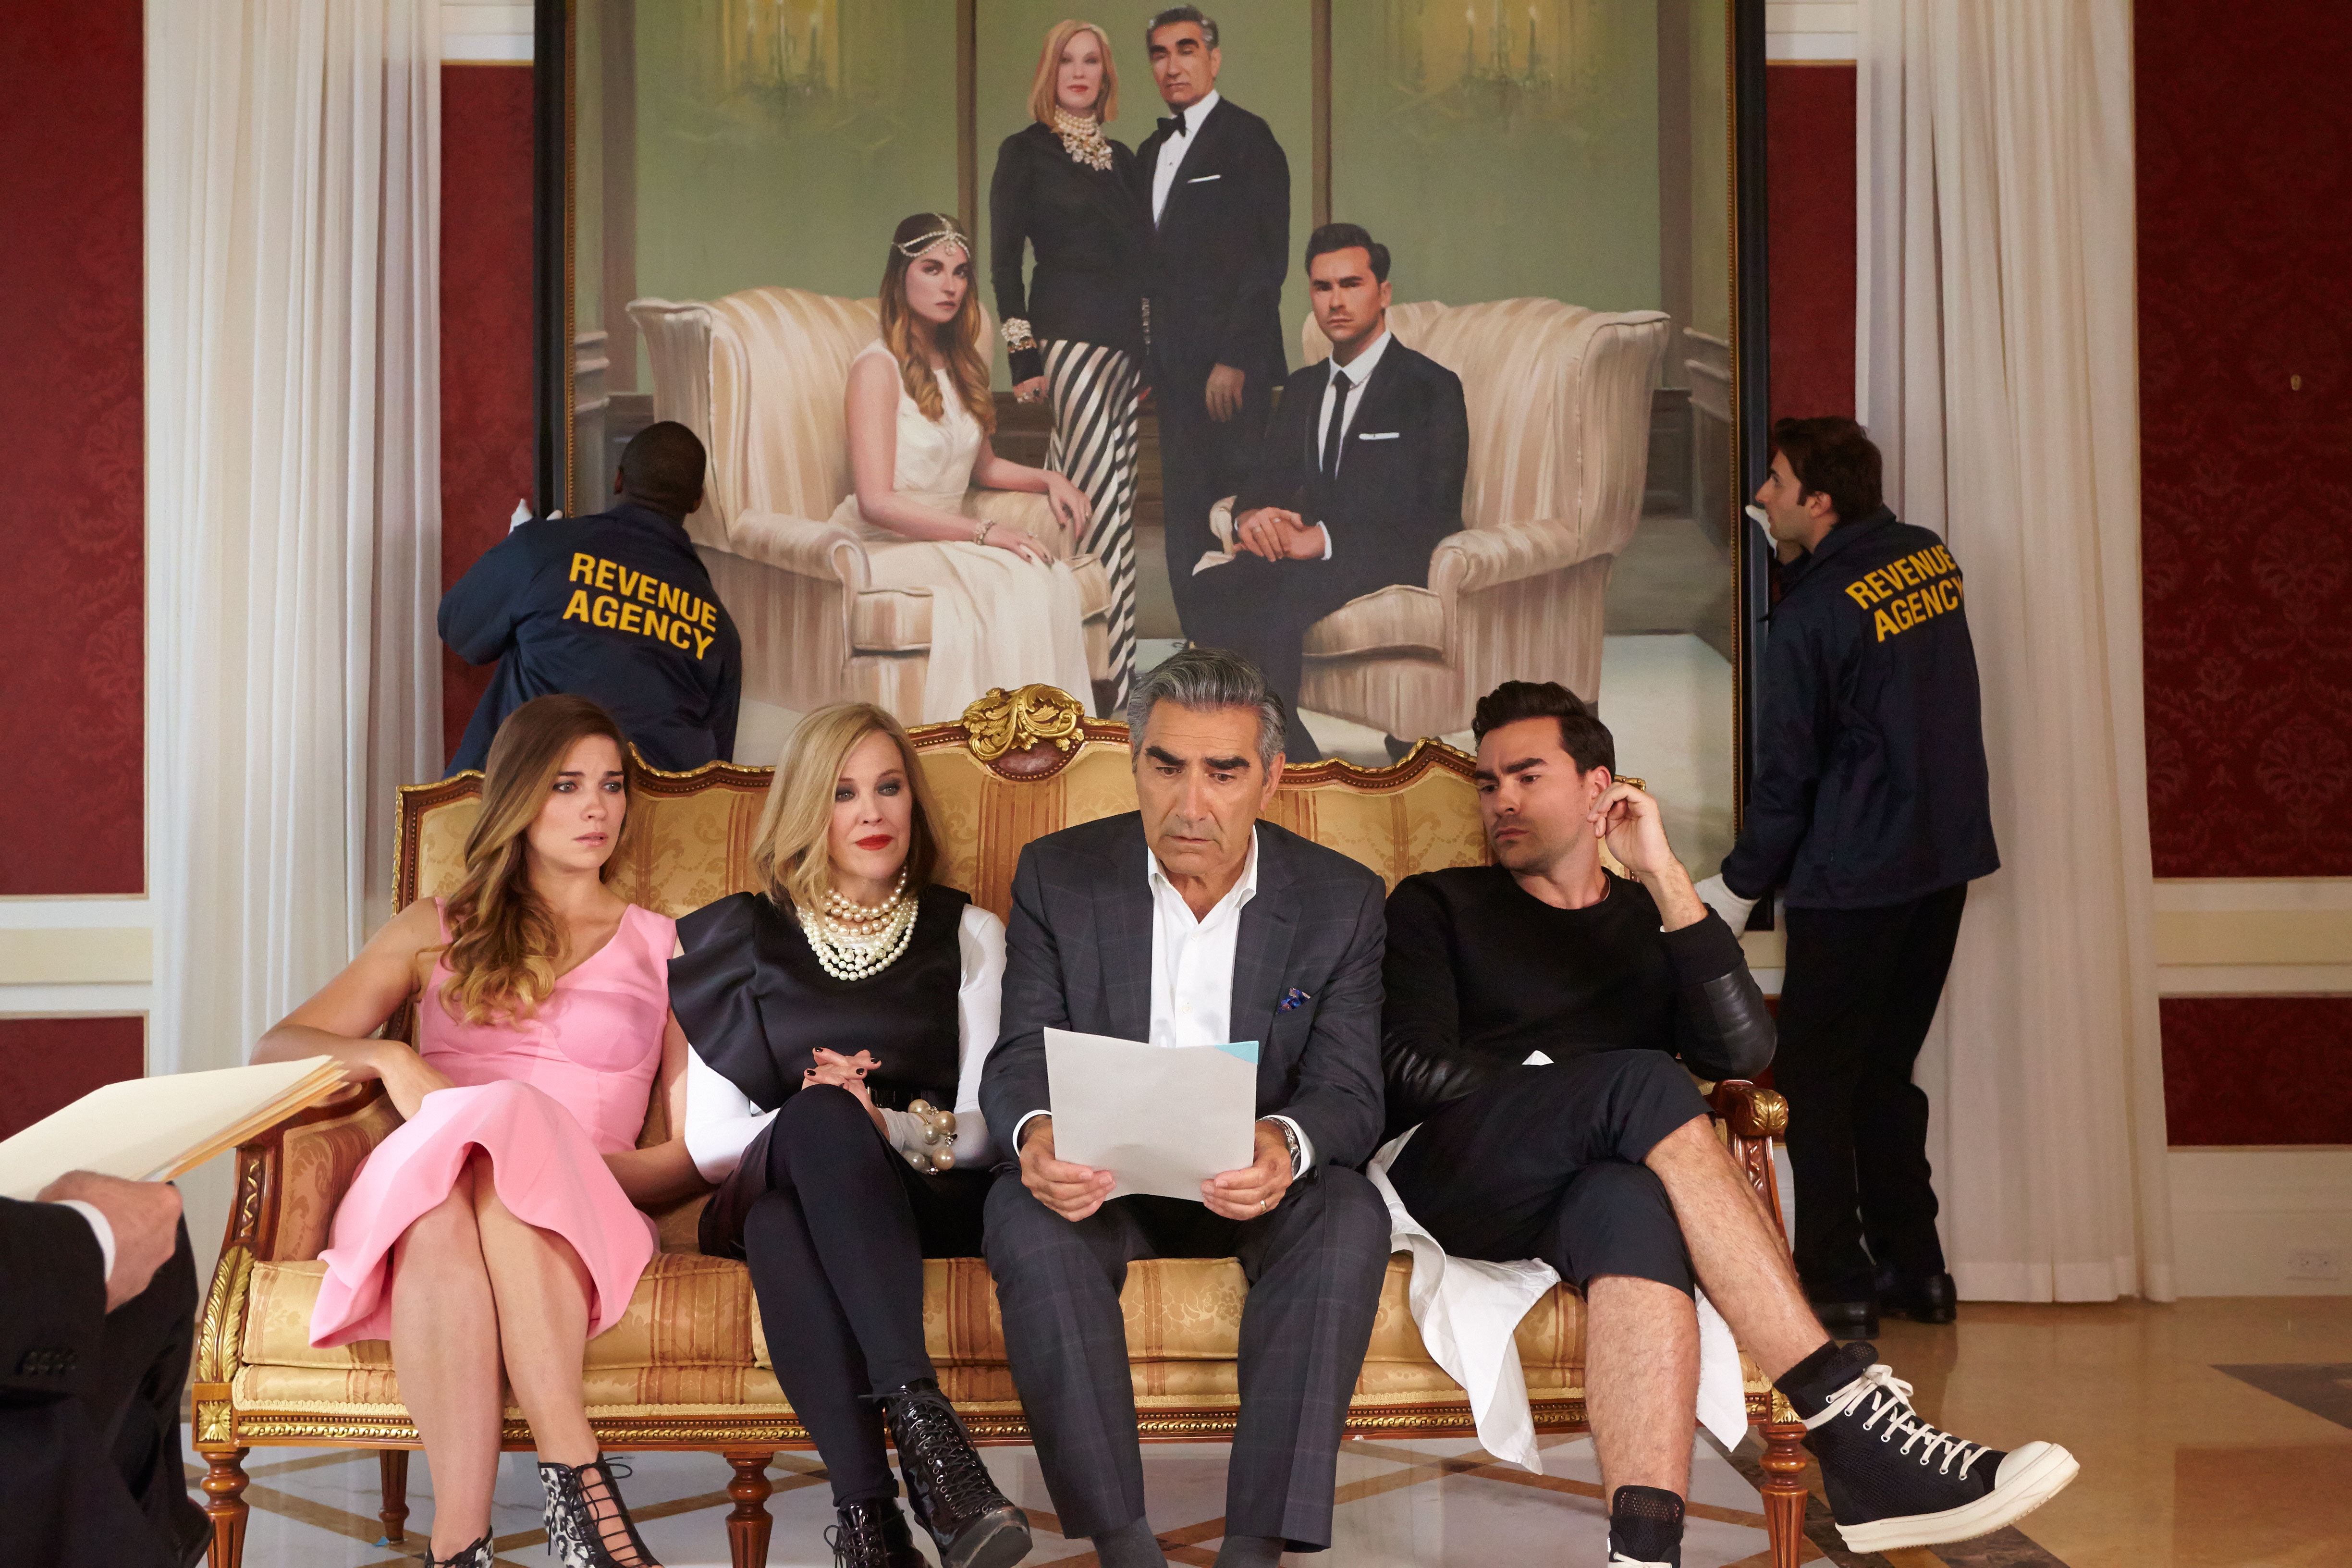 SCHITT'S CREEK, an Original Scripted Comedy Series Starring Eugene Levy and  Catherine O'Hara, Joins POP's Launch Slate | Business Wire